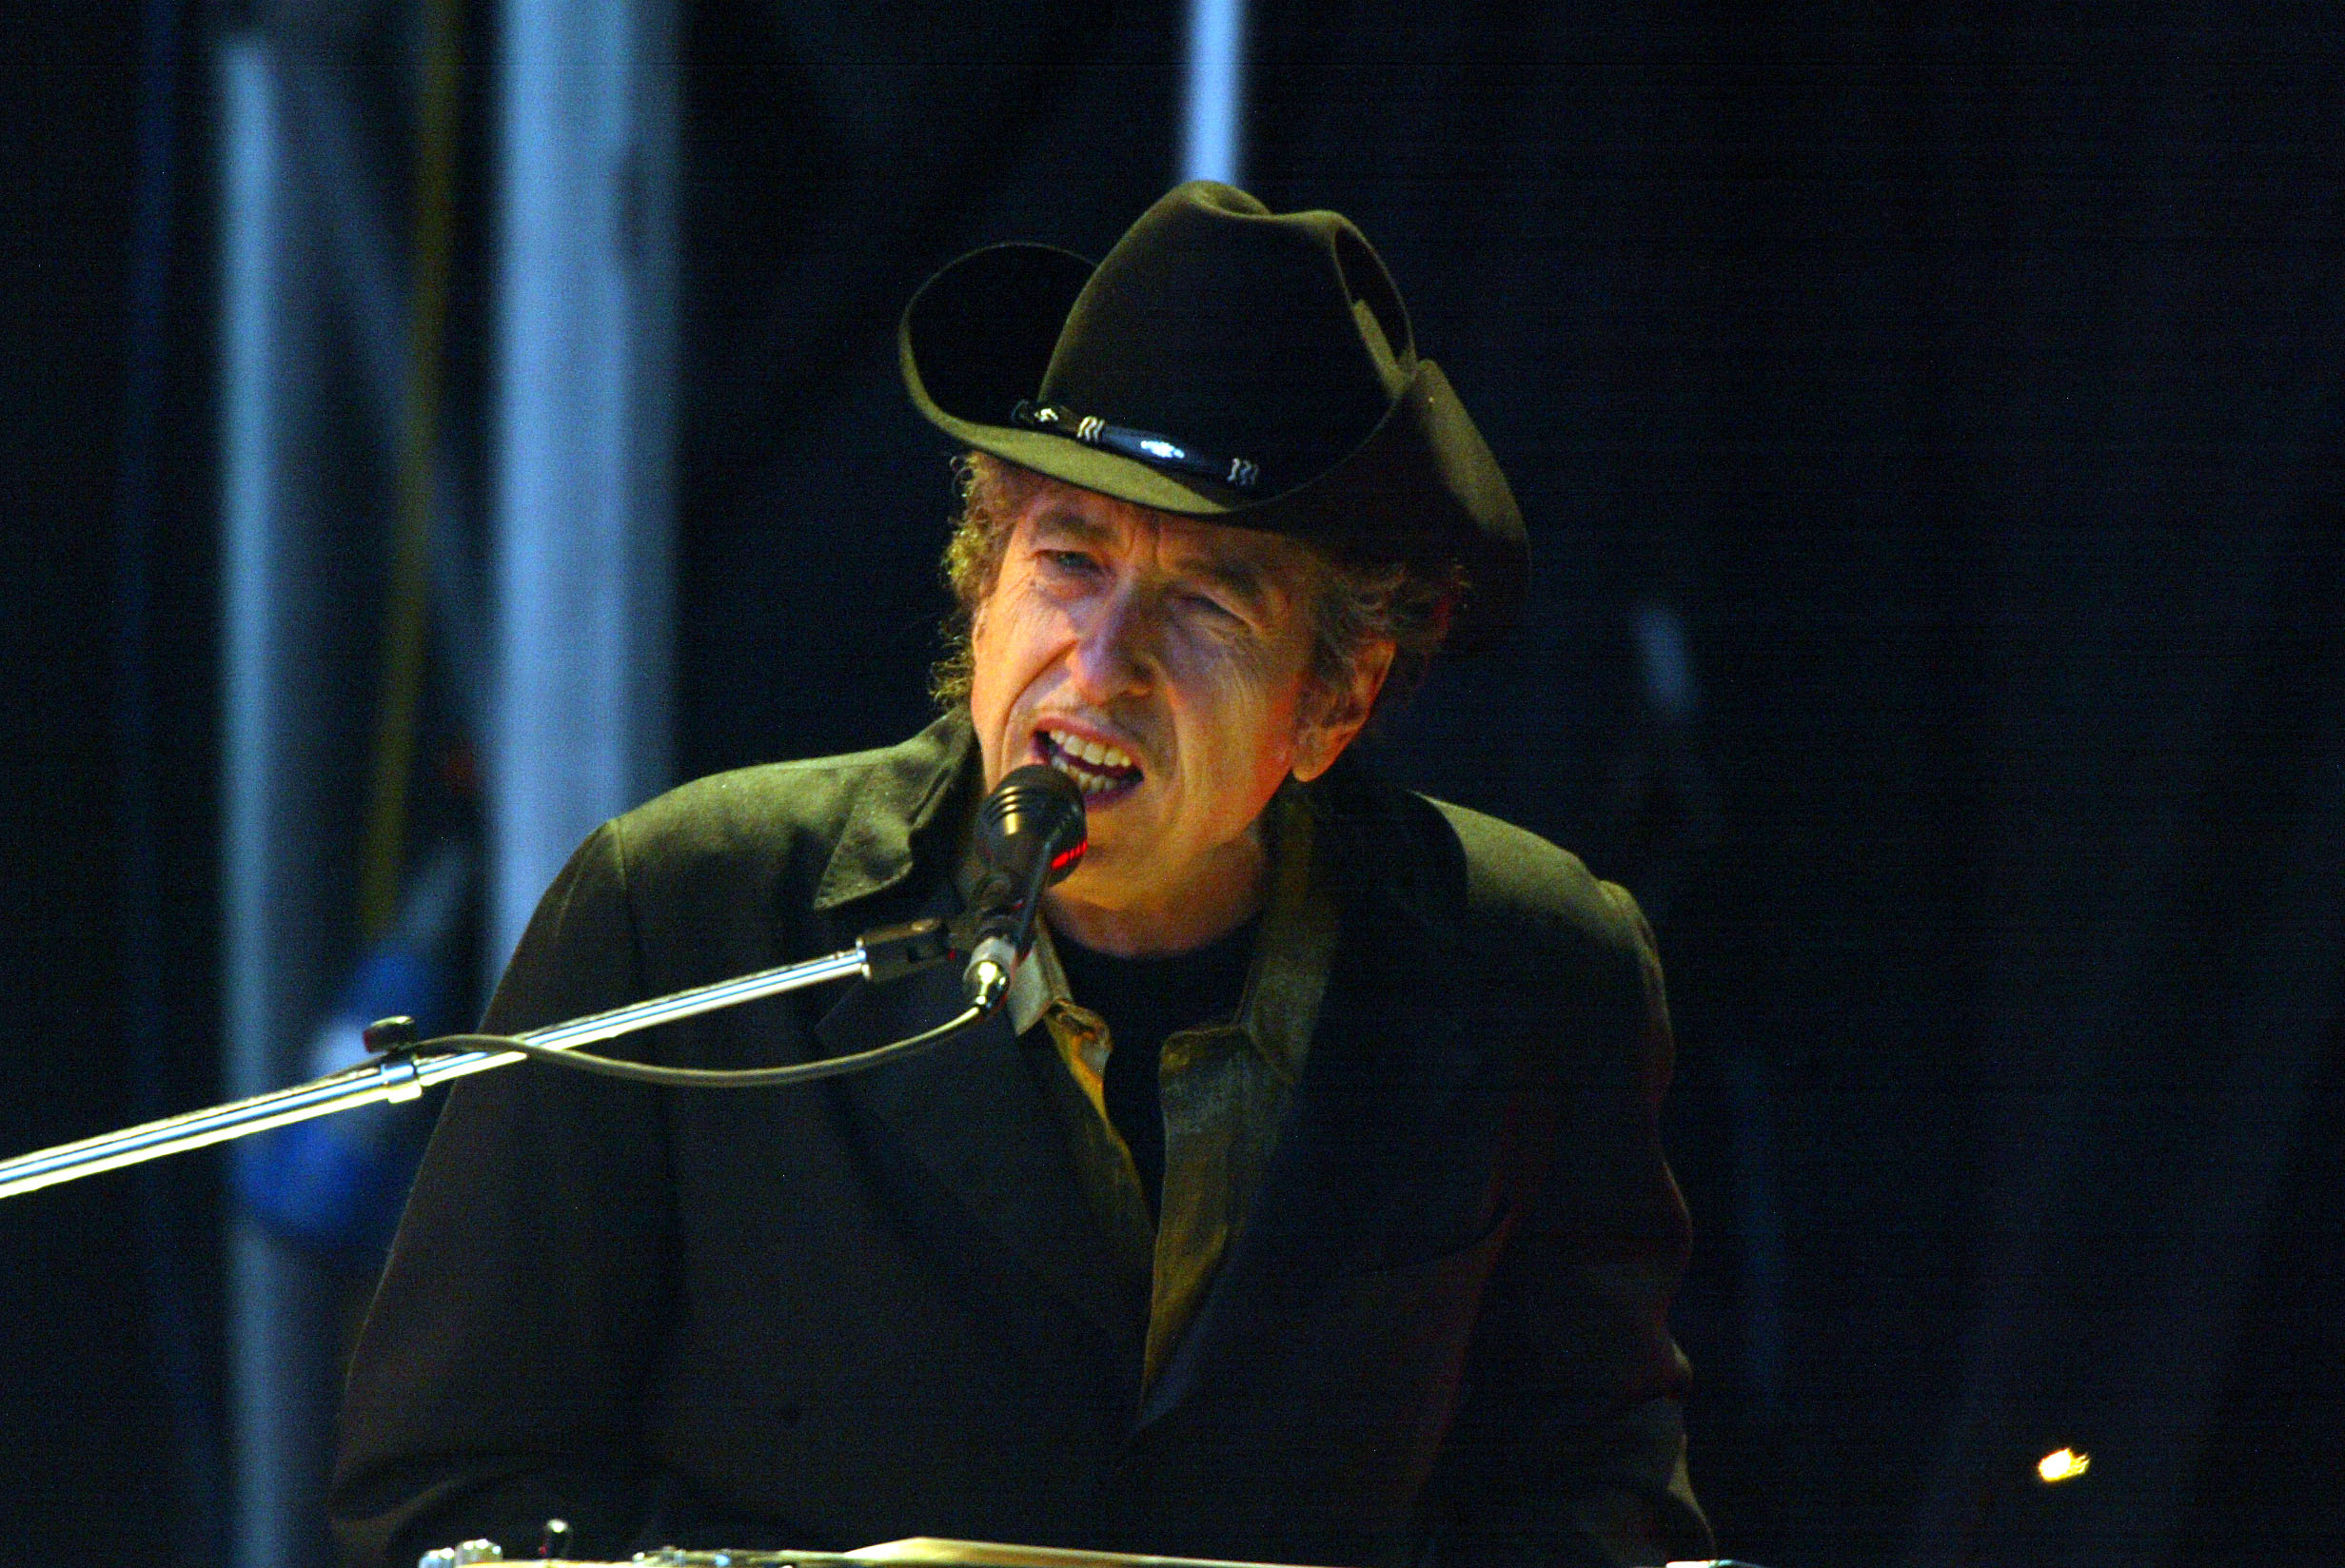 LONDON - JUNE 20: Singer Bob Dylan performs on stage at The Fleadh 2004 at Finsbury Park June 20, 2004 in London, England. The Fleadh 2004 doubles as the London stop of the UK leg of his European tour. (Photo by Getty Images)